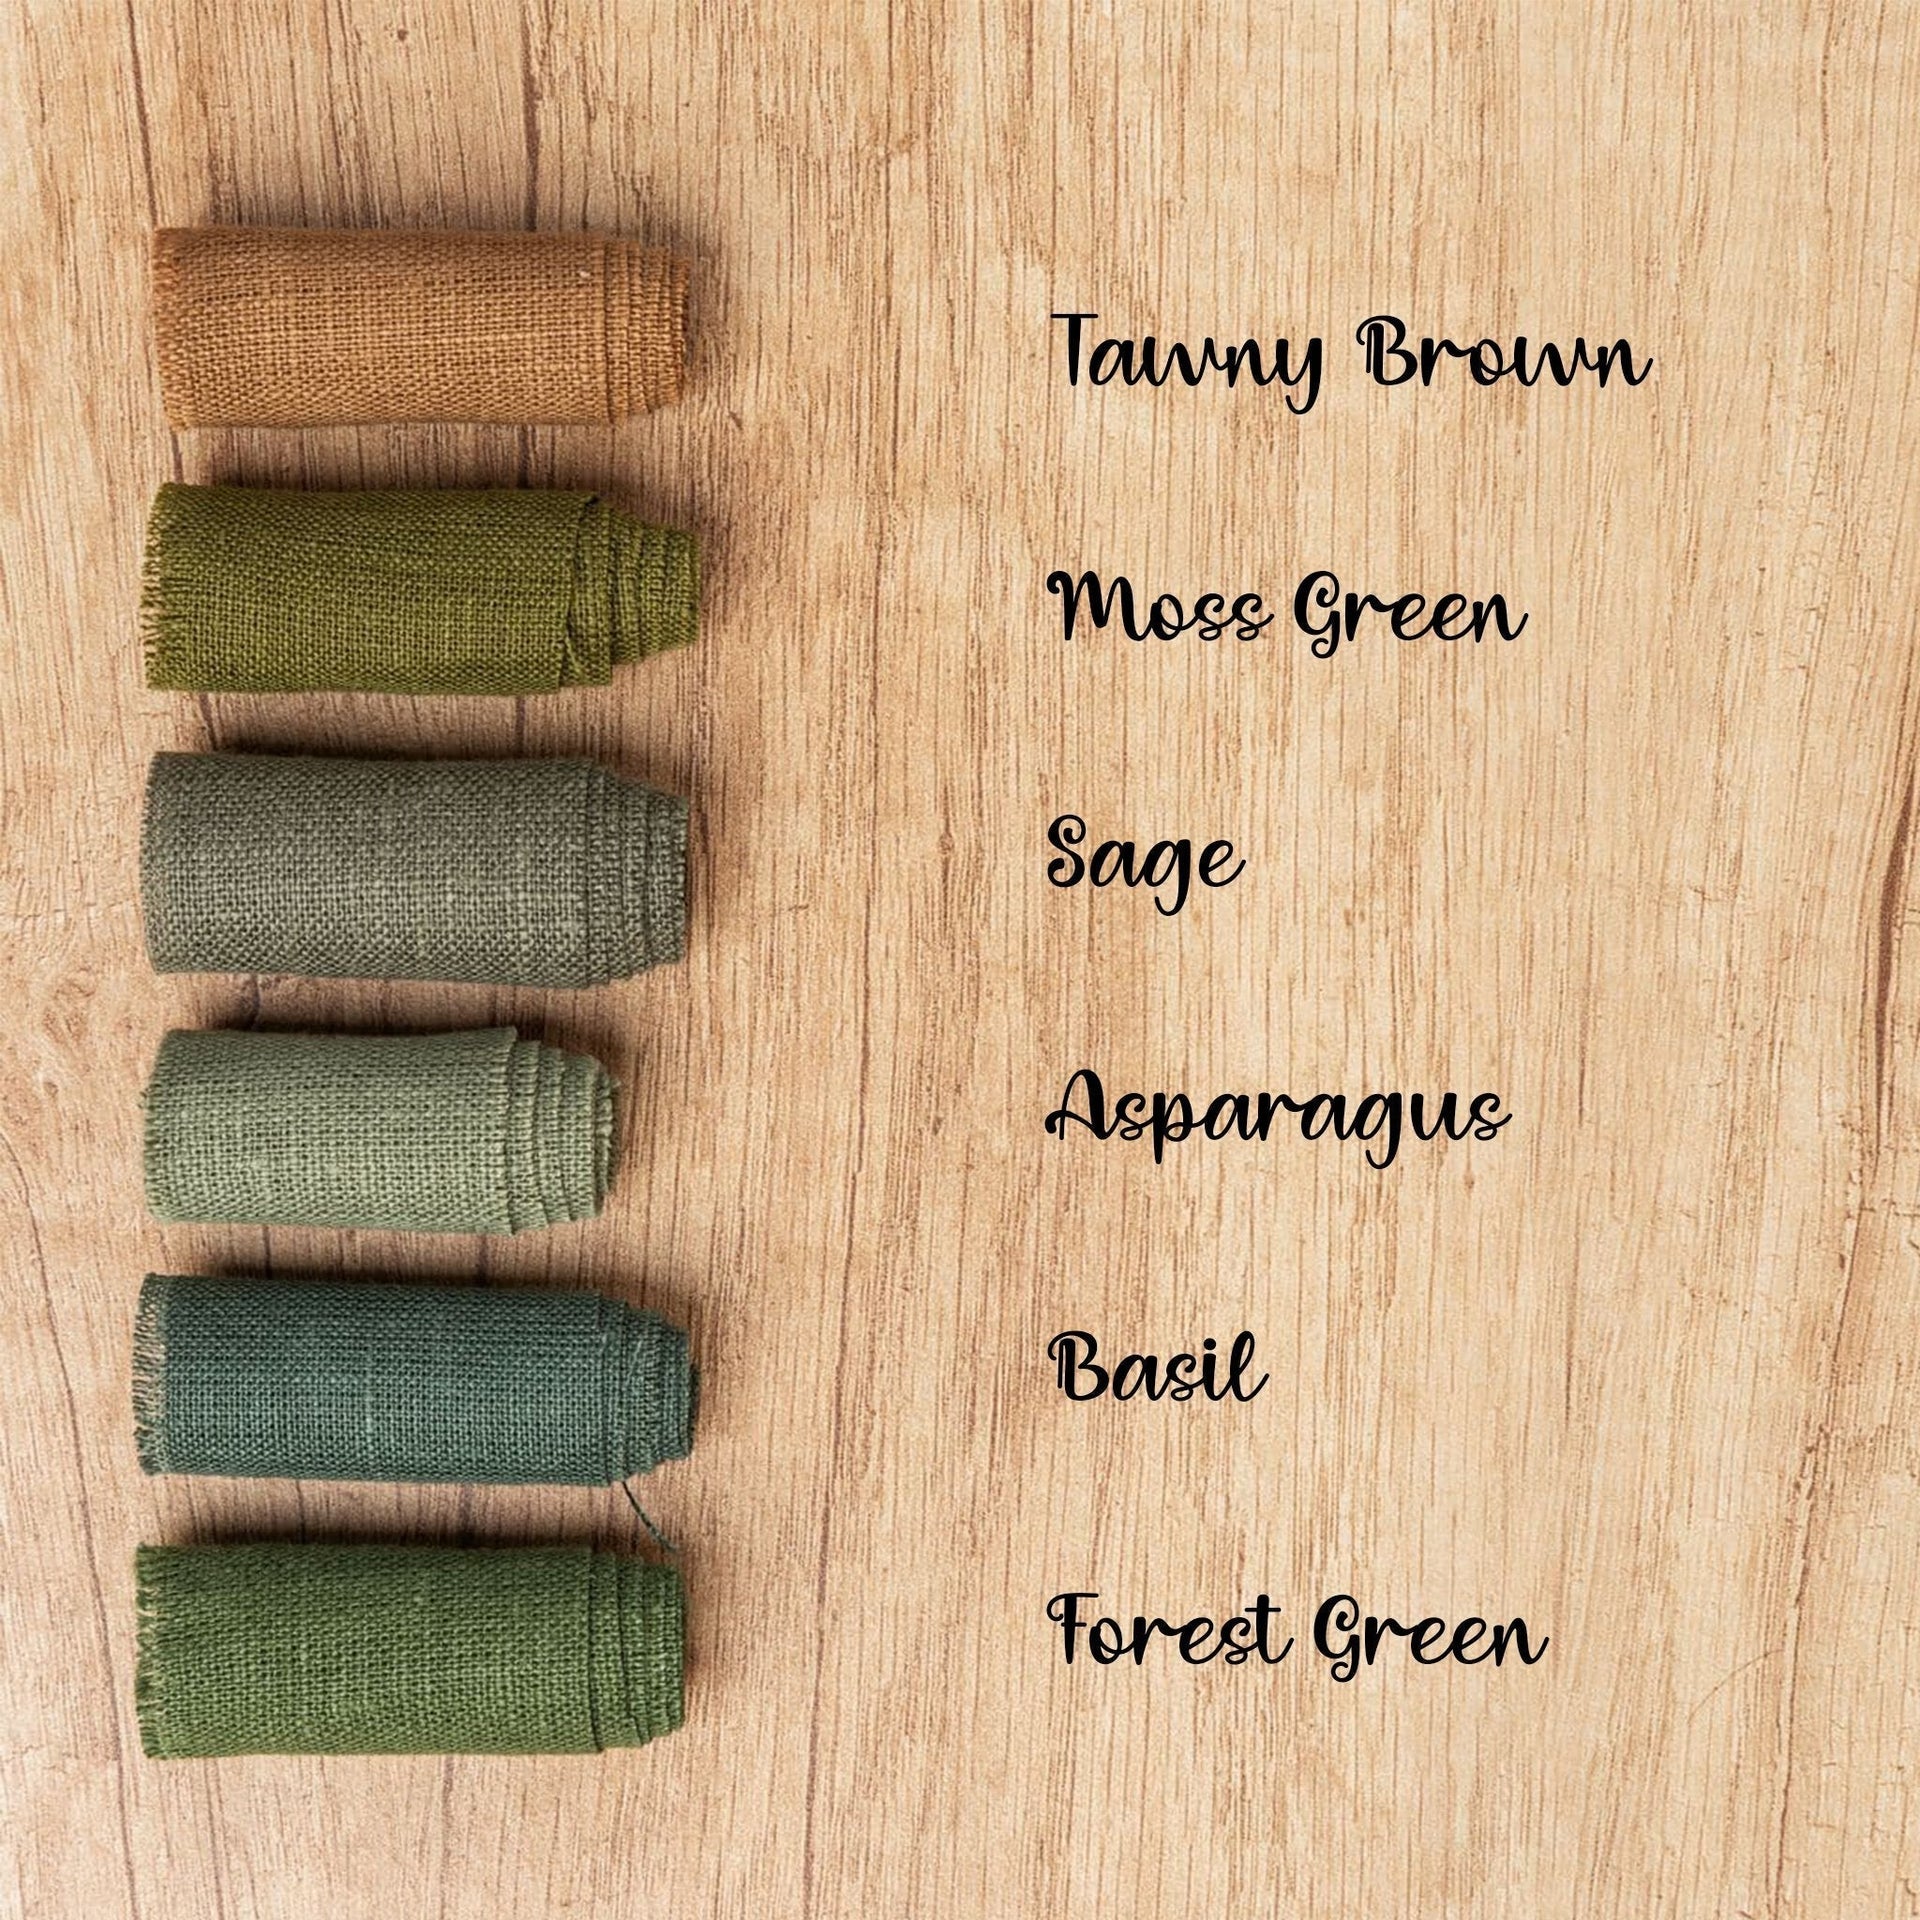 color: Tawny Brown, color: Moss Green, color: Sage, color: Asparagus, color: Basil, color: Basil, color: Forest Green